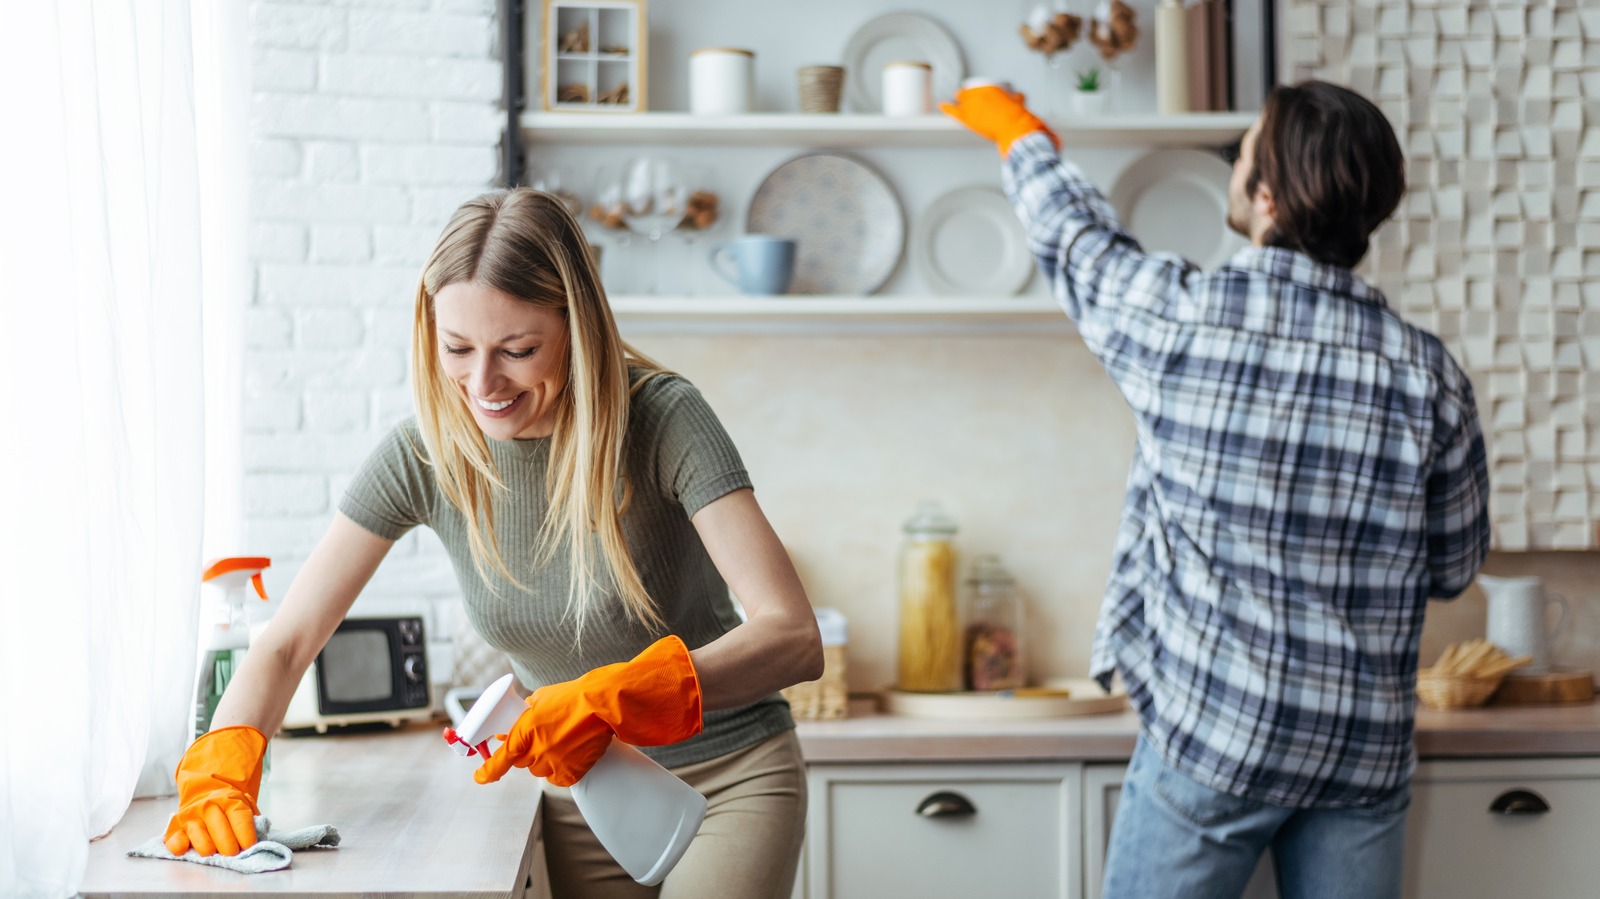 How to Disinfect Kitchen Sponge Bacteria - Practically Spotless